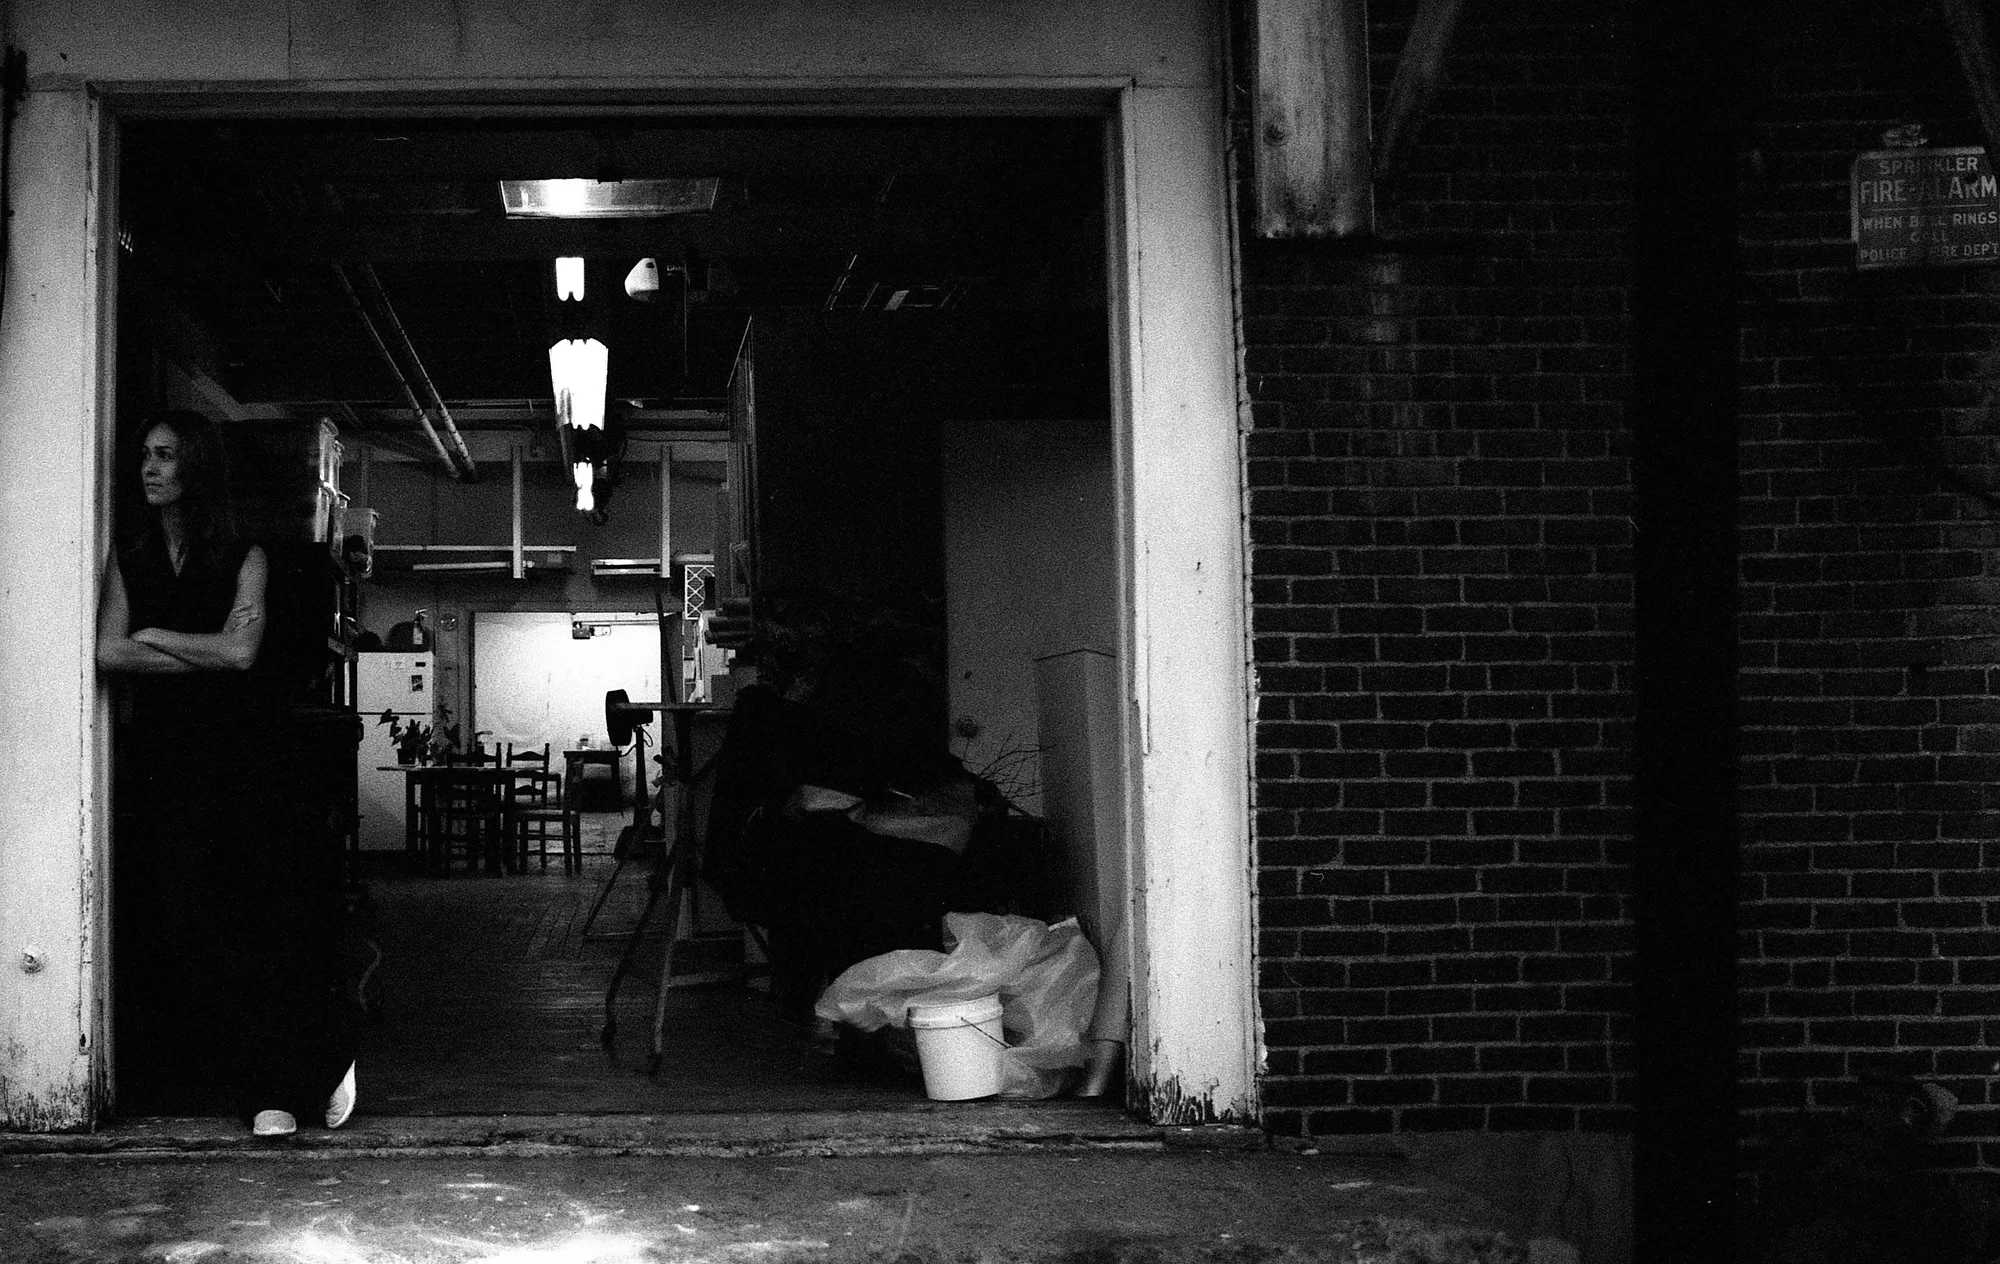 Woman leaning in doorway in low light (Pic: Courtesy CatLABS)